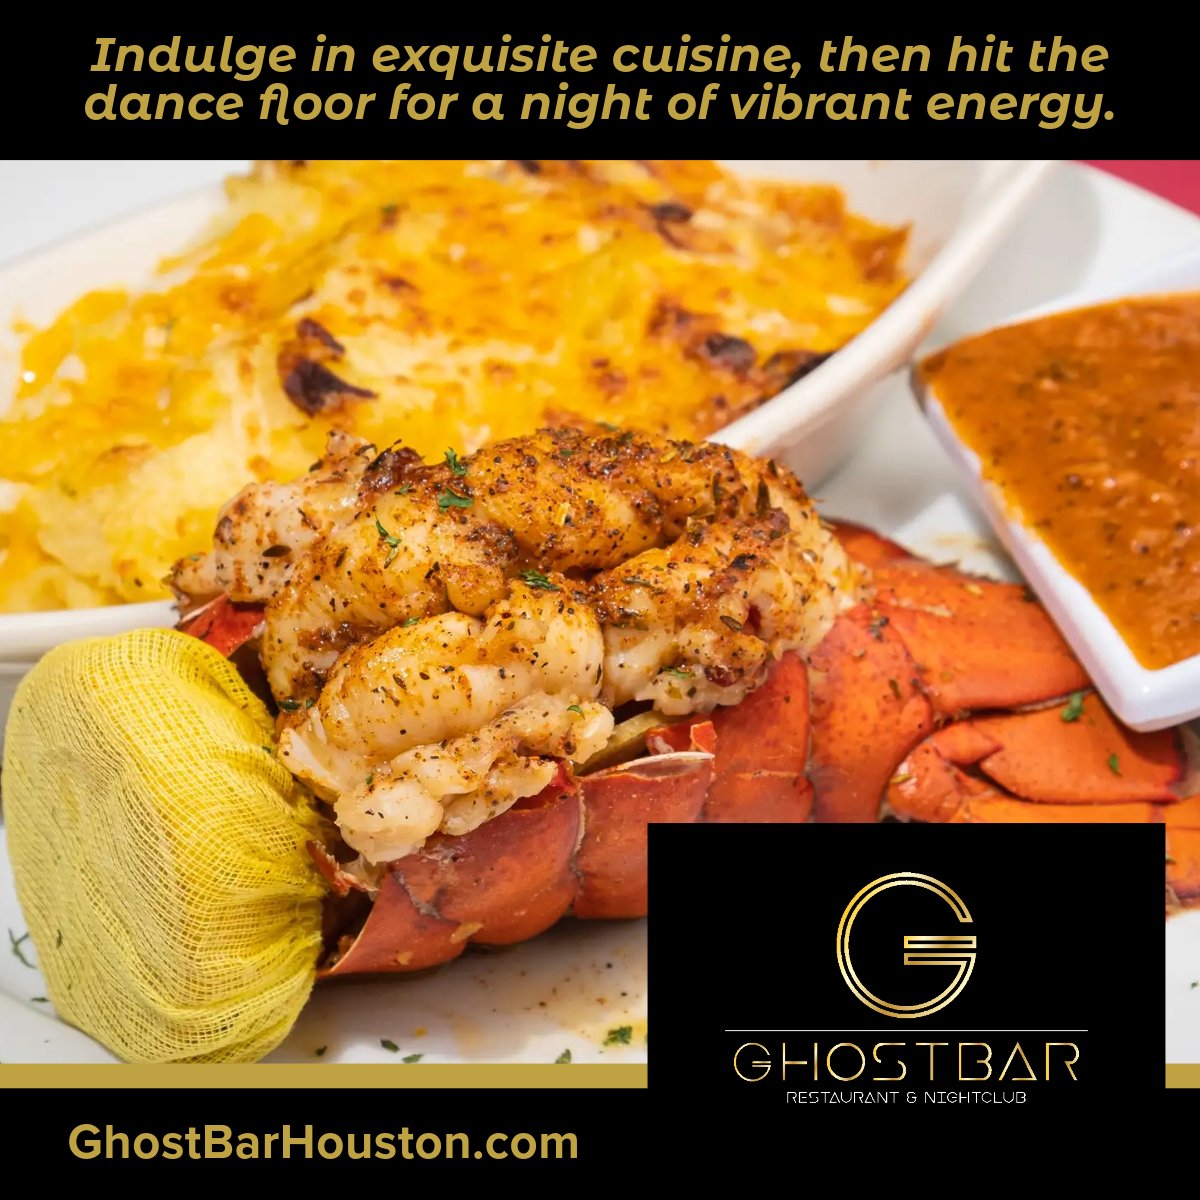 🌃 Elevate your dining experience at Ghost Bar Restaurant and Nightclub in Houston!

Join Us Tonight: kool.bio/gbh

🍽 Indulge in exquisite cuisine, then hit the dance floor for a night of vibrant energy. 🎉 

#GhostBarHouston #NightlifeElevated